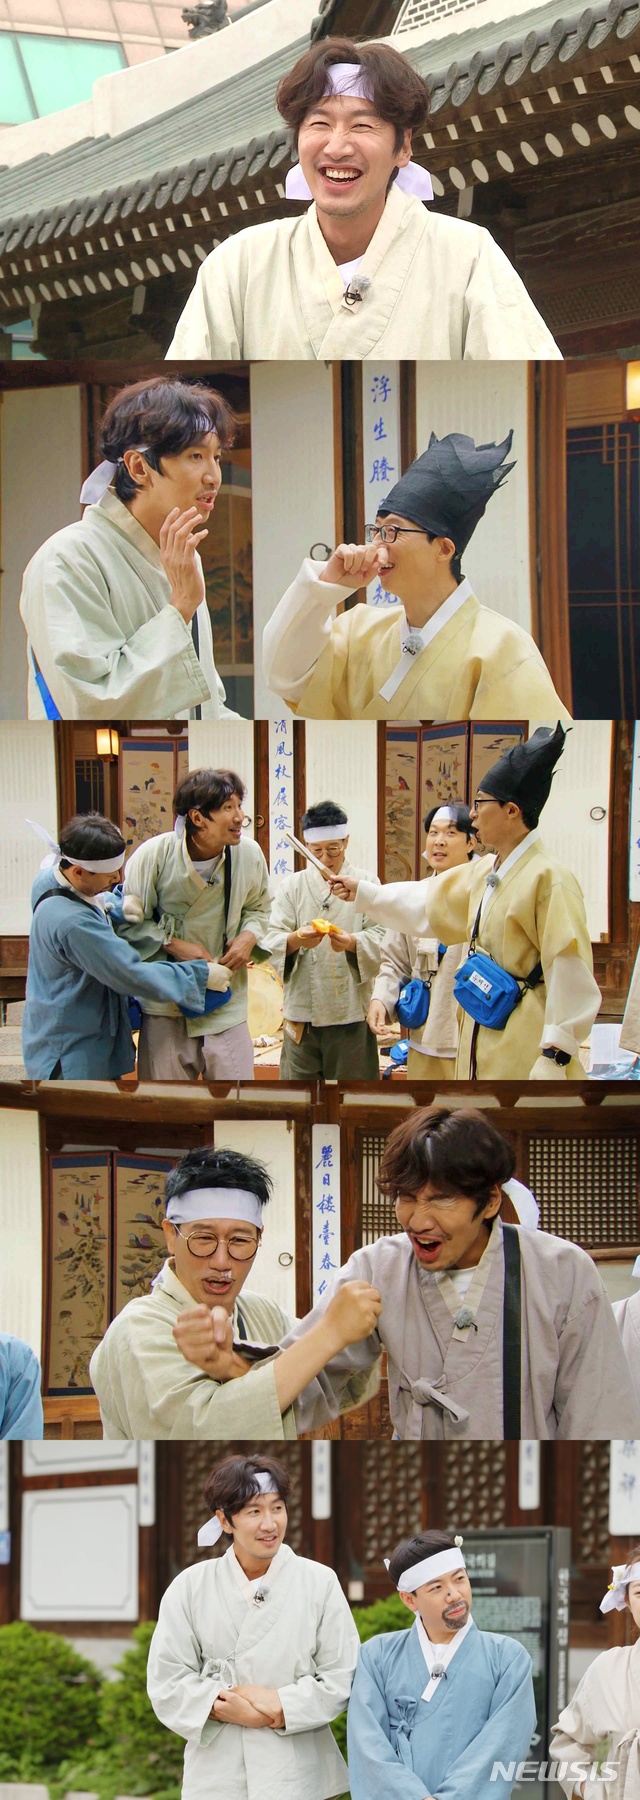 In Running Man, which is broadcasted at 5 pm on the 6th, the members will repeatedly mention Lee Kwang-soos departure and give a pleasant smile.The first members who met after the Lee Kwang-soo departure article on the broadcast last week told Lee Kwang-soo as soon as the filming began, I get off., started the Lee Kwang-soo teasing.The members were shown to the second row related to the departure of Ha: If I recruit my members, Cha: Cha Eun-woo, Cha Tae-hyun and made the scene laugh.What will the last dinner be? He made Lee Kwang-soos departure news pleasant in the style of Running Man.The days of Lee Kwang-soo will continue, with members constantly referring to getting off this week.On this day, the members who turned into a head are going to give a race to the three-piece Yoo Jae-Suk.From the opening, Yoo Jae-Suk opened the door to Lee Kwang-soo, saying, Im going out (get off) and Savoie is a mess.Lee Kwang-soos betrayal also ran on the day, when Lee Kwang-soo was caught trying to frame other deer to get more leaflets from Yoo Jae-Suk, and secretly stealing the leaflets elsewhere.The members said, Where are you going before you go out!On the other hand, Ji Seok-jin, who declared Crying Cross once a time until he got off, shouted Cross again and made a fuss.sympathy media